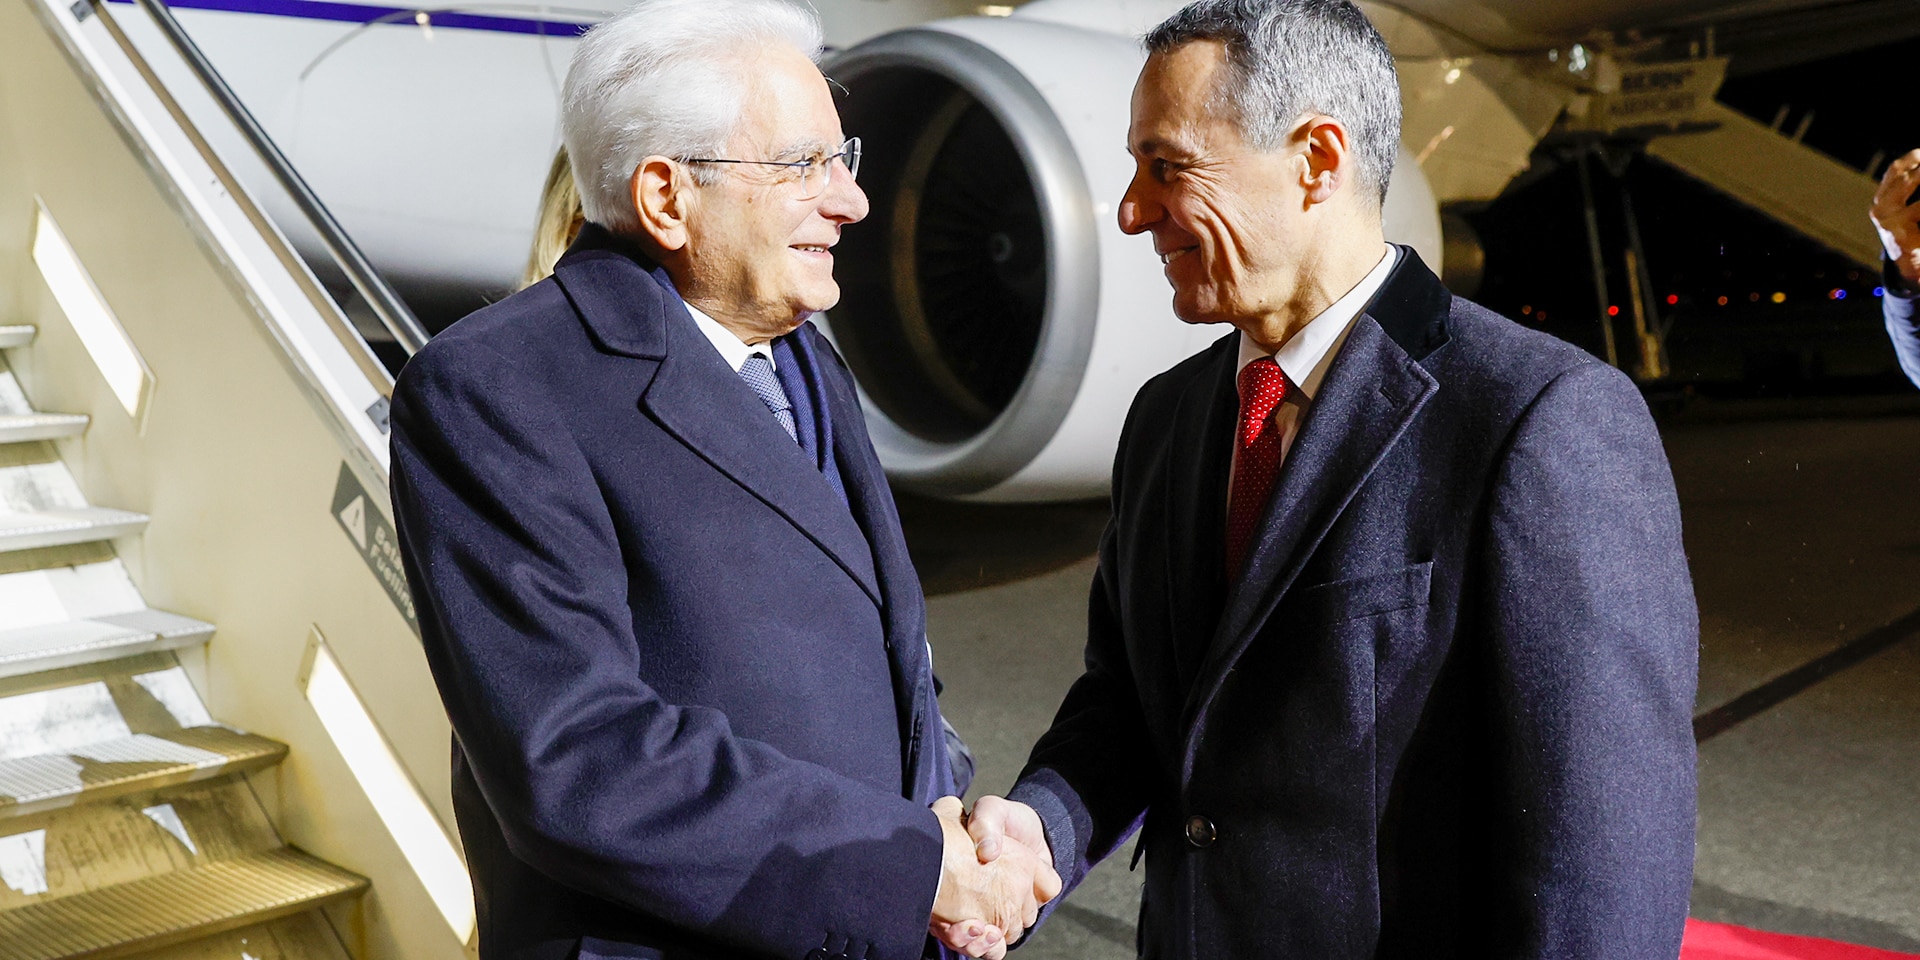 The president of the Swiss Confederation Ignazio Cassis welcomes Italian President Sergio Mattarella at the airport in Belp.